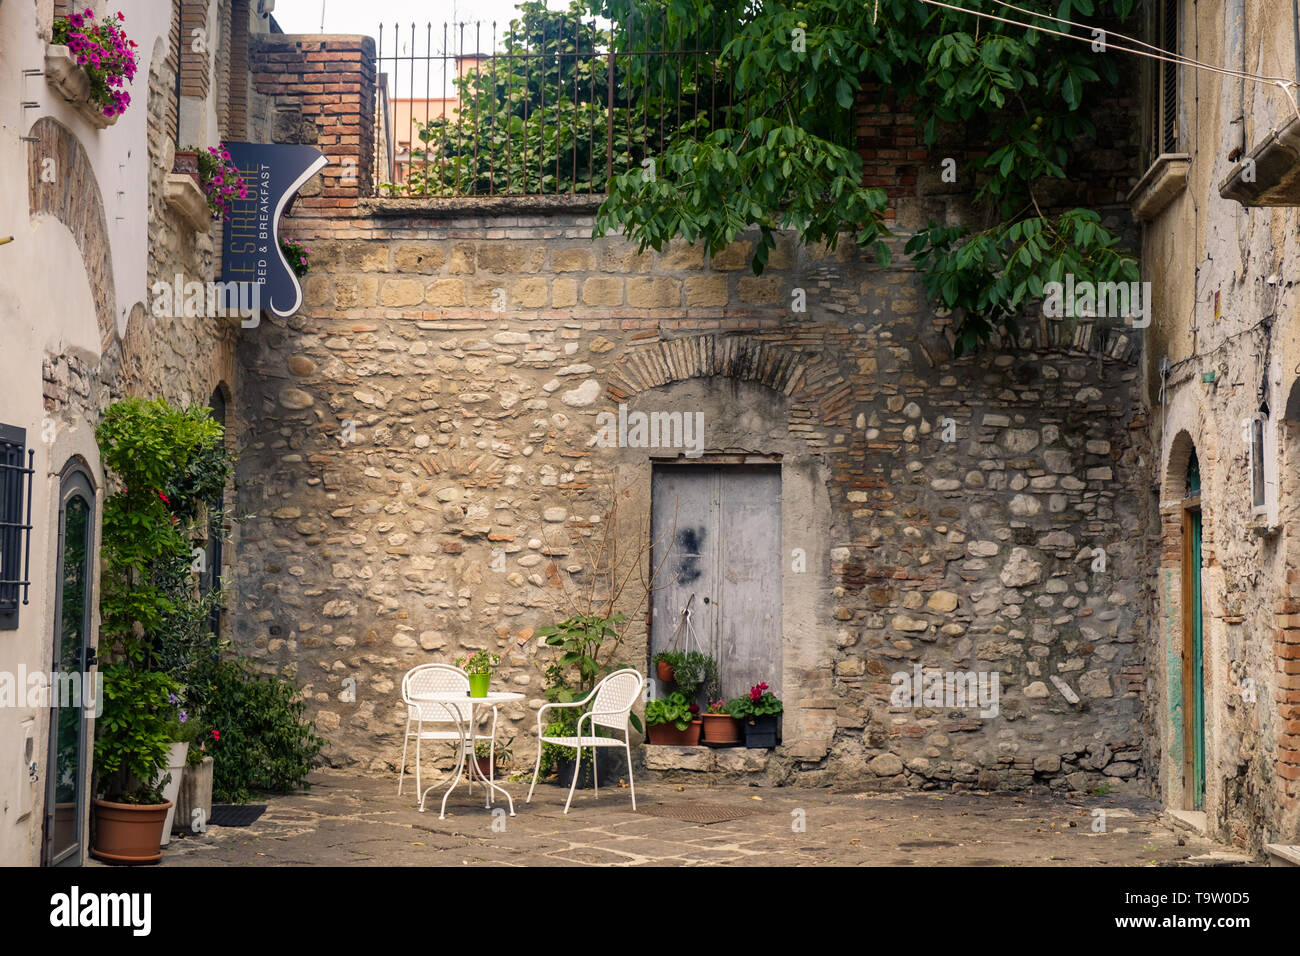 A small square in the middle of Benevento invites to sit down and enjoy a peaceful moment. A sign says 'Bed & Breakfast Le Streghe ('the witches'). Stock Photo